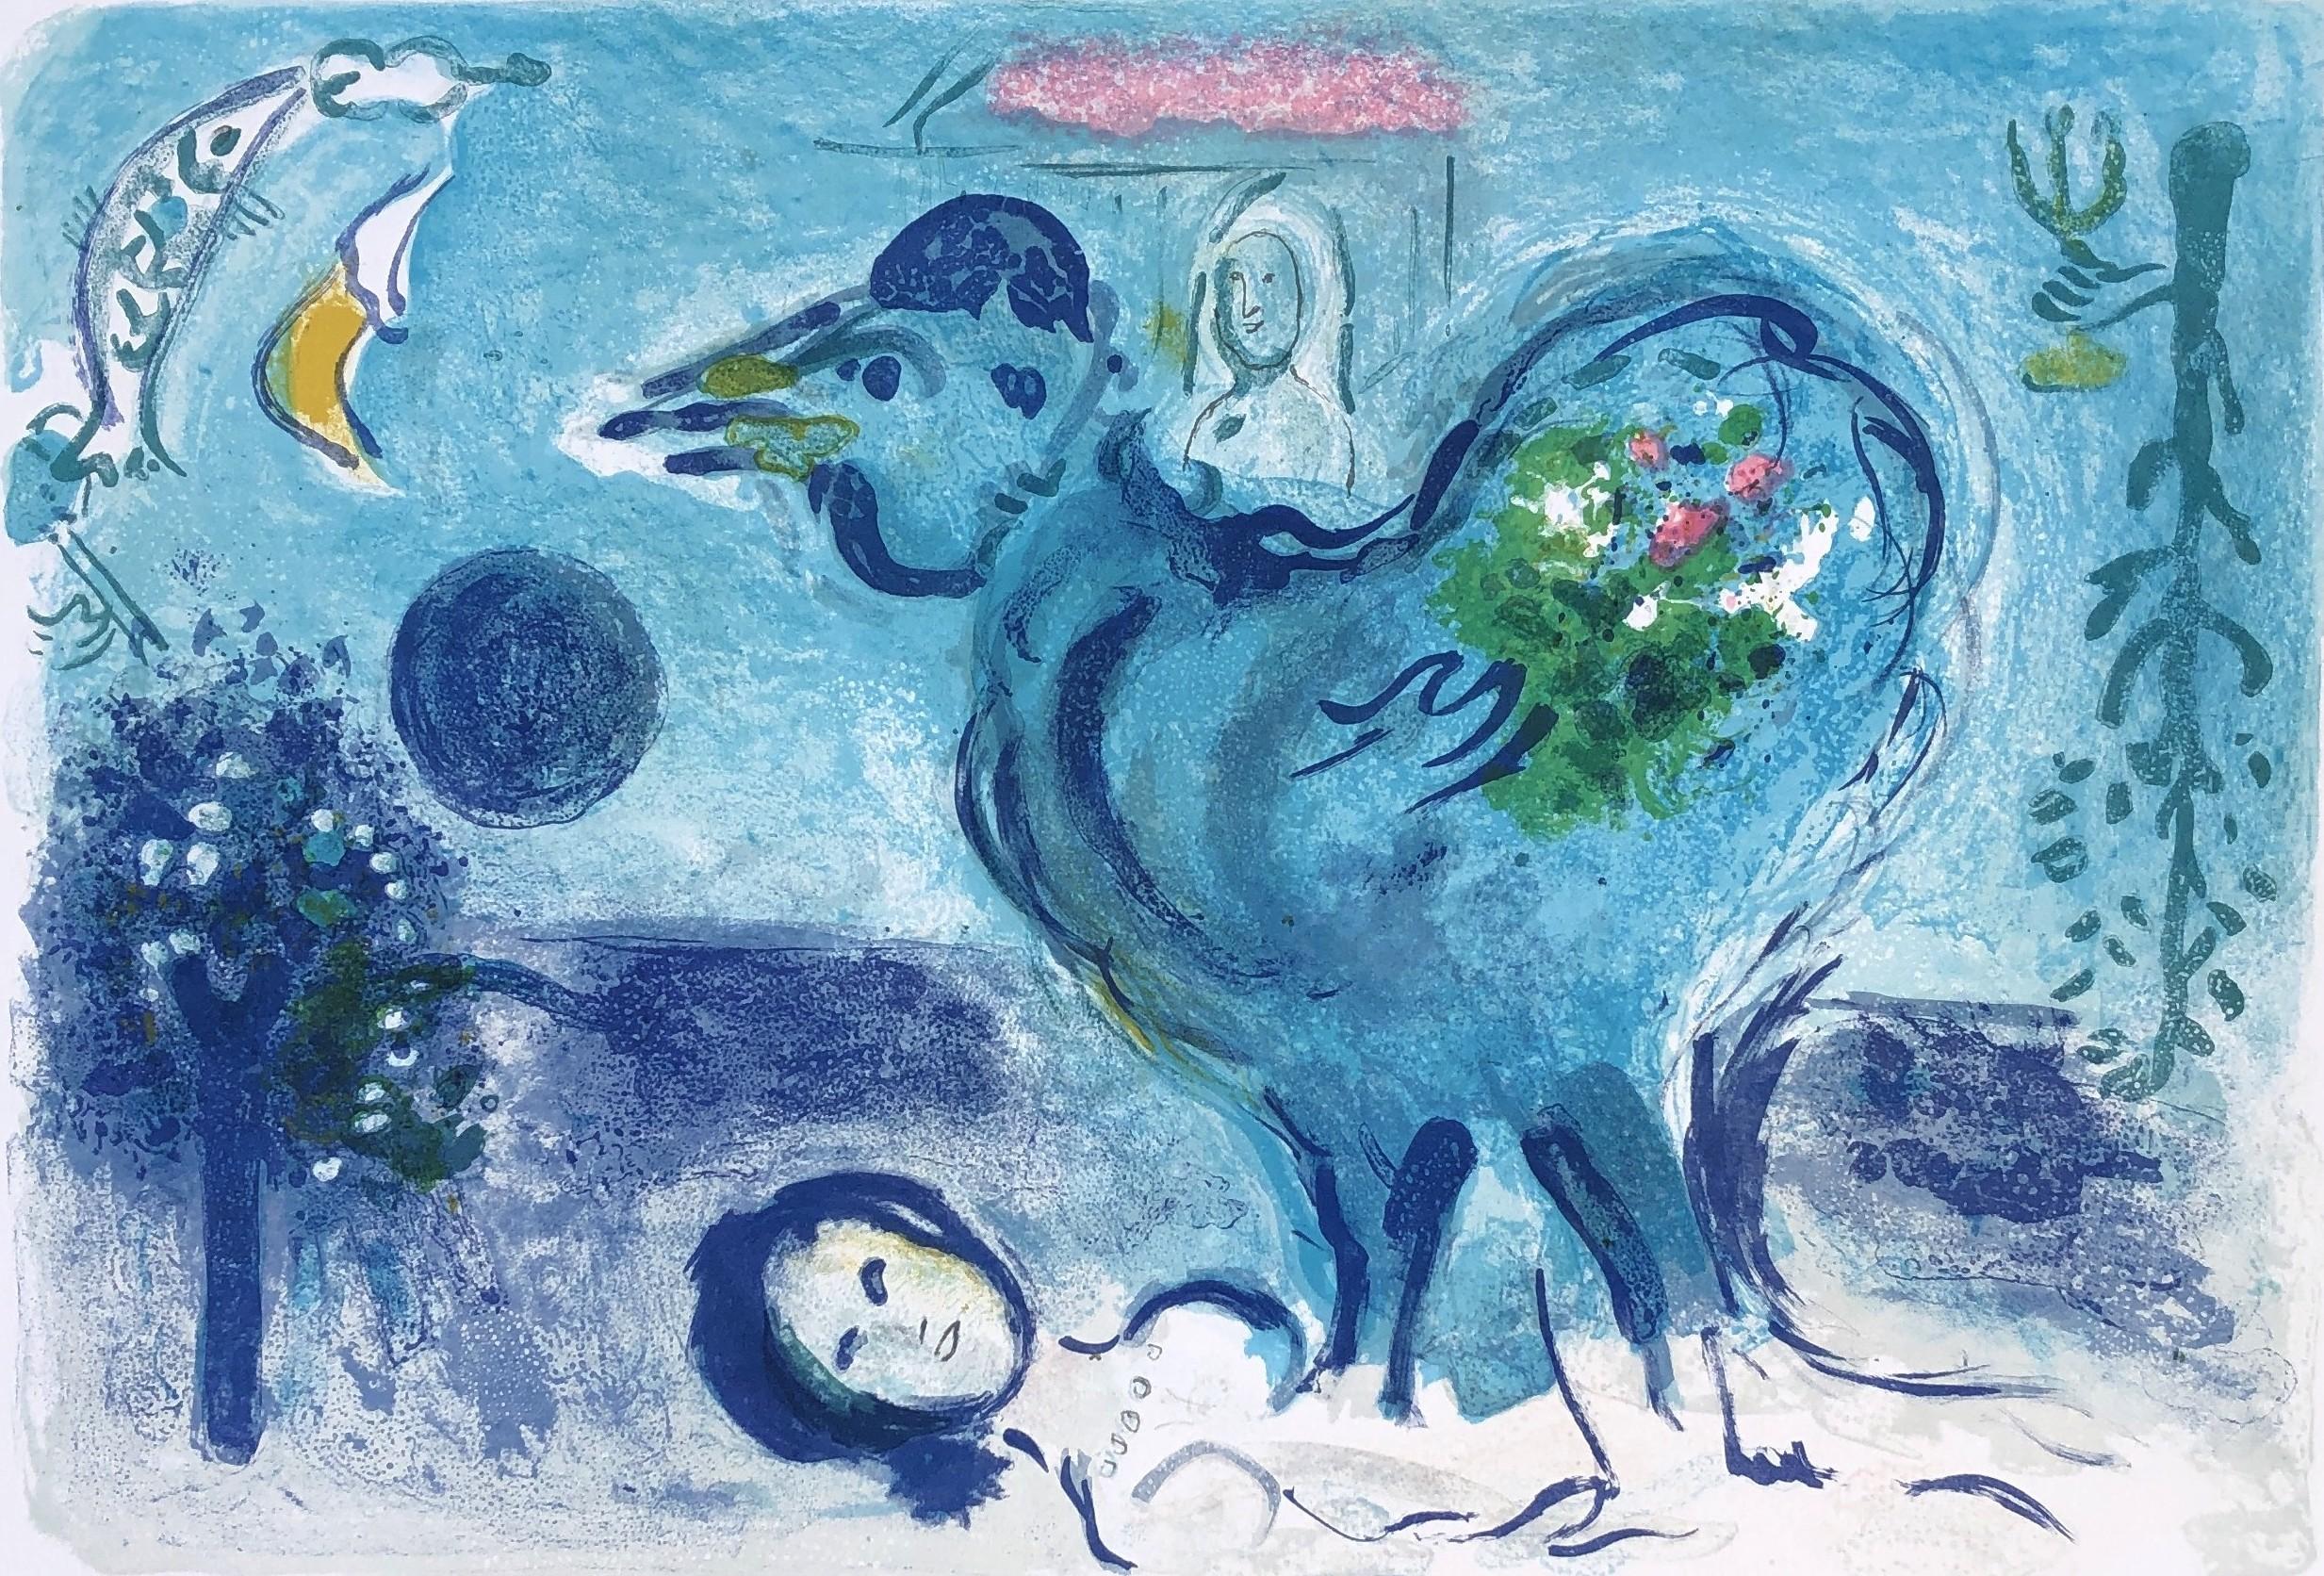 Landscape With Rooster - Original Lithograph Handsigned - 100 copies - Print by Marc Chagall